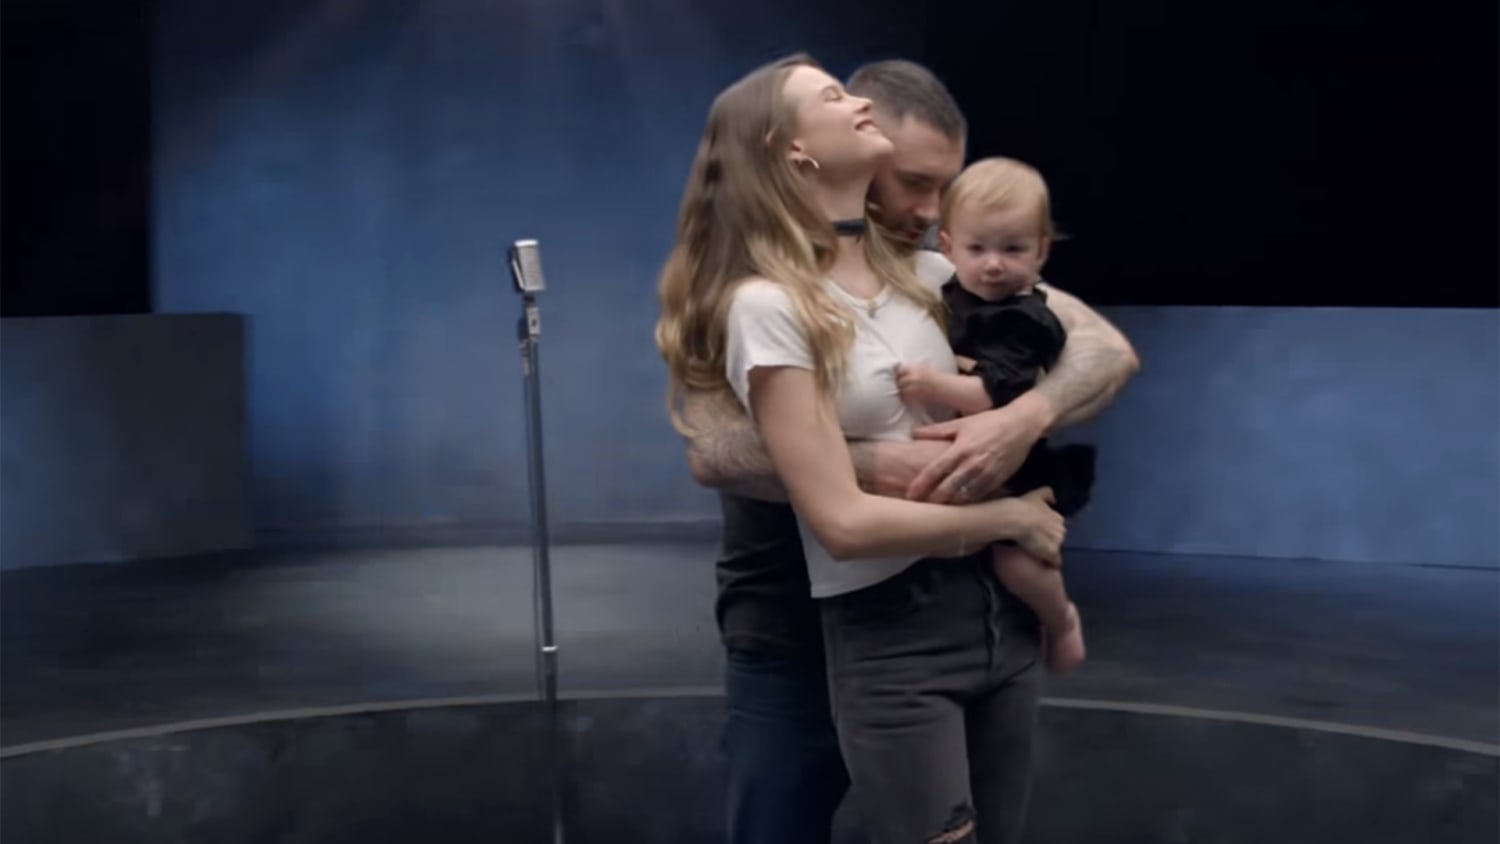 Adam Levine dances with daughter Dusty Rose, wife, and celebs in new music  video